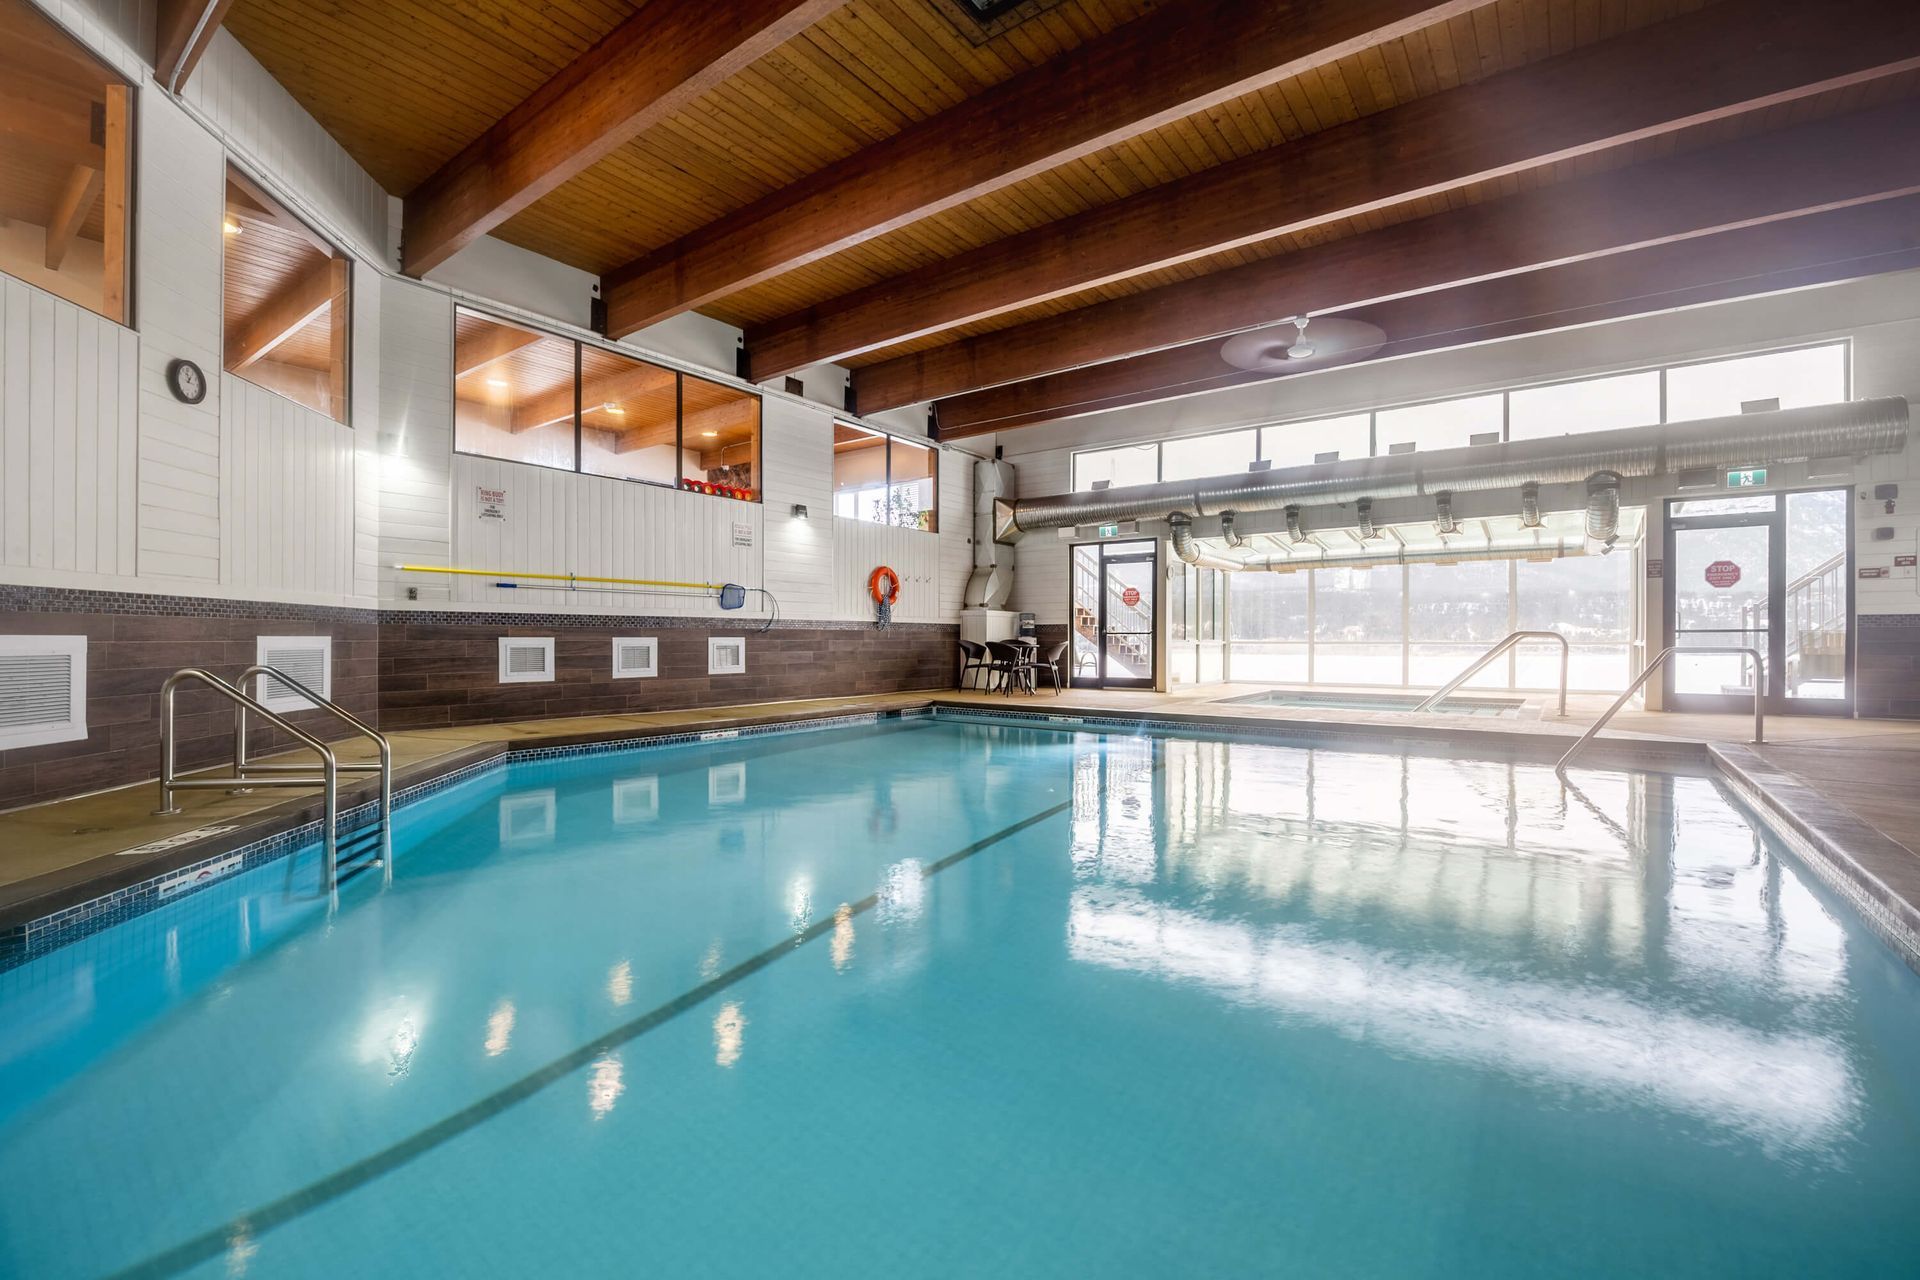 Access to Akiskinook's private indoor pool & hot tub included with your stay at Cherished Memories, an Invermere Windermere BC Vacation Rental hosted by Aisling Baile Property Management.